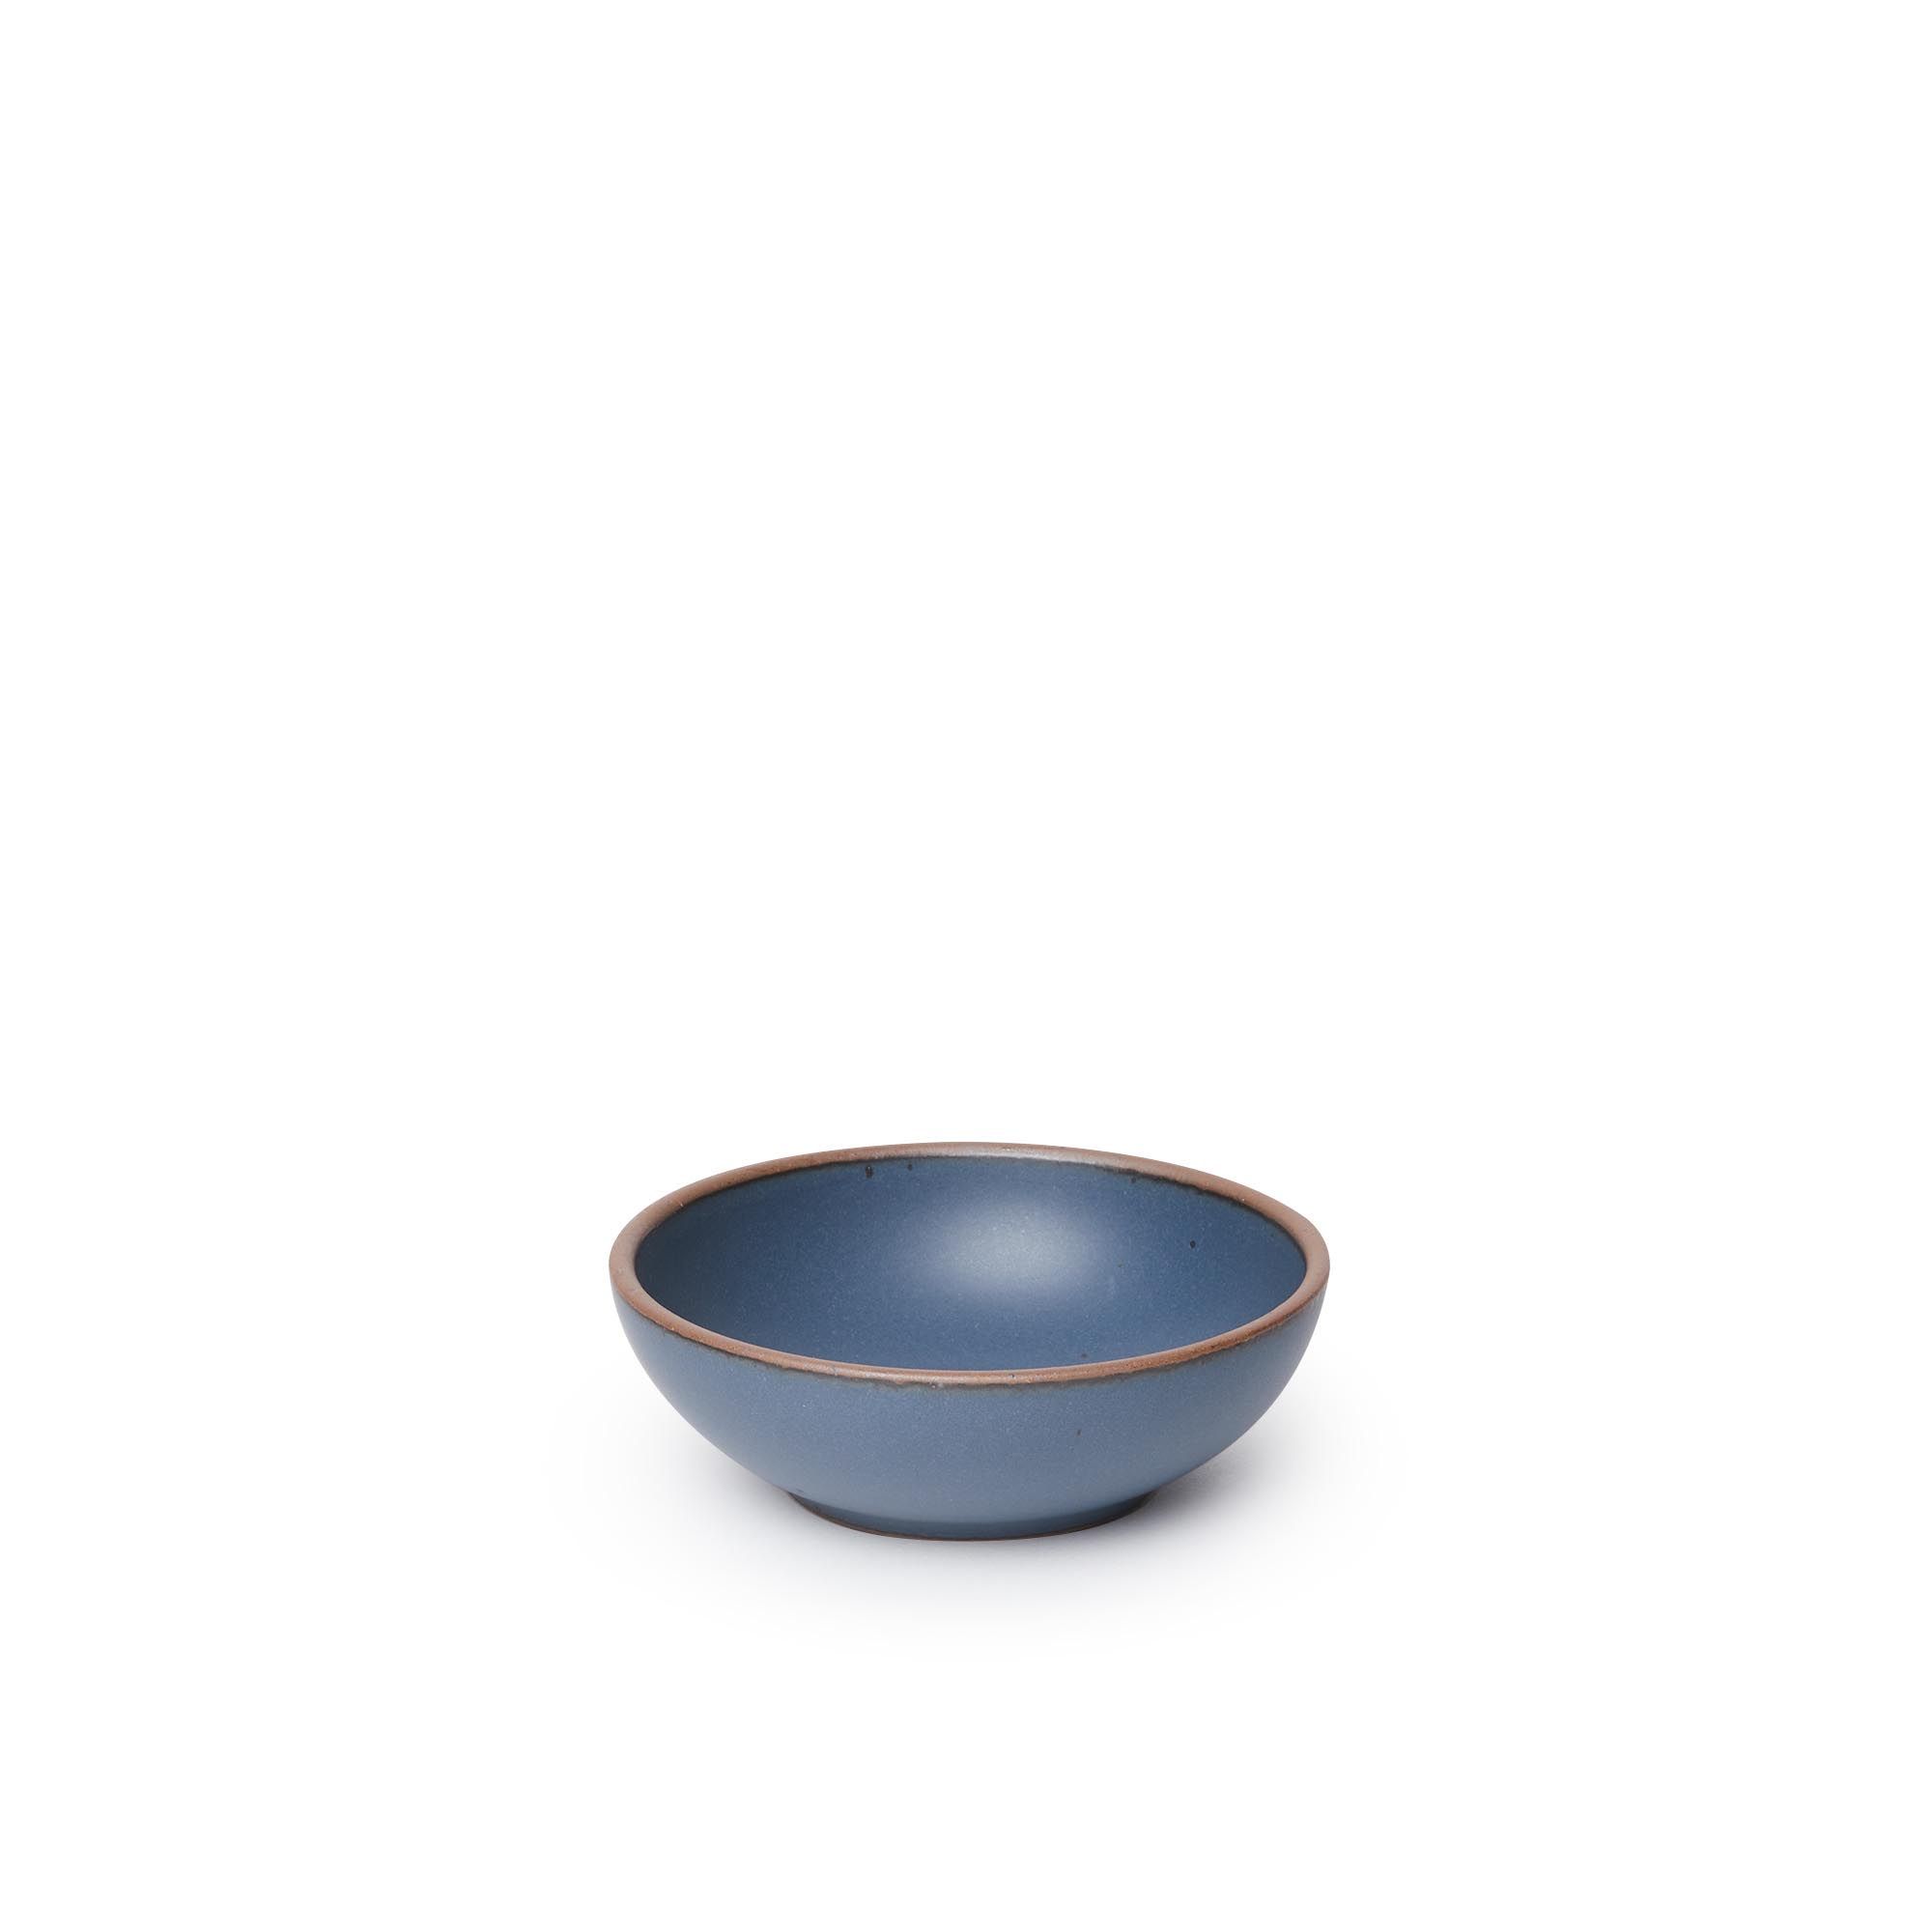 A small shallow ceramic bowl in a toned-down navy color featuring iron speckles and an unglazed rim